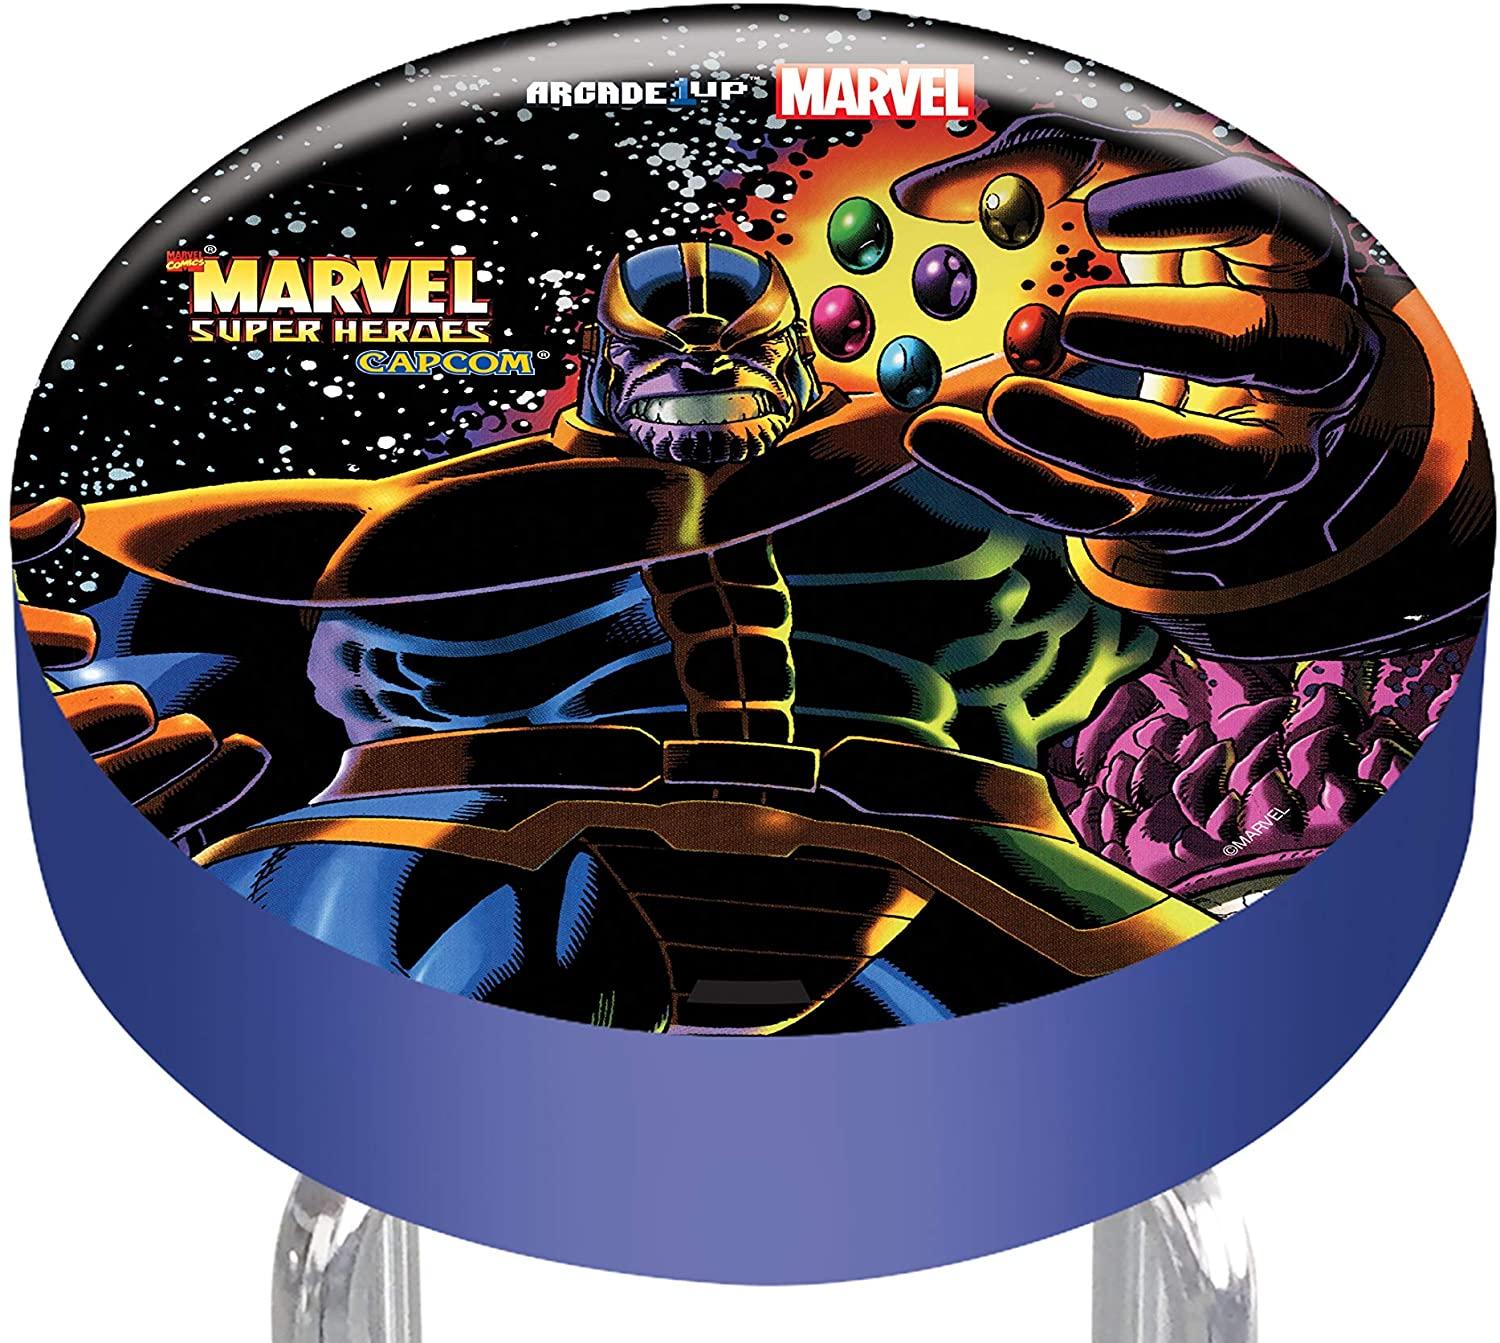 Arcade1UP Marvel Adjustable Stool for $49 Shipped